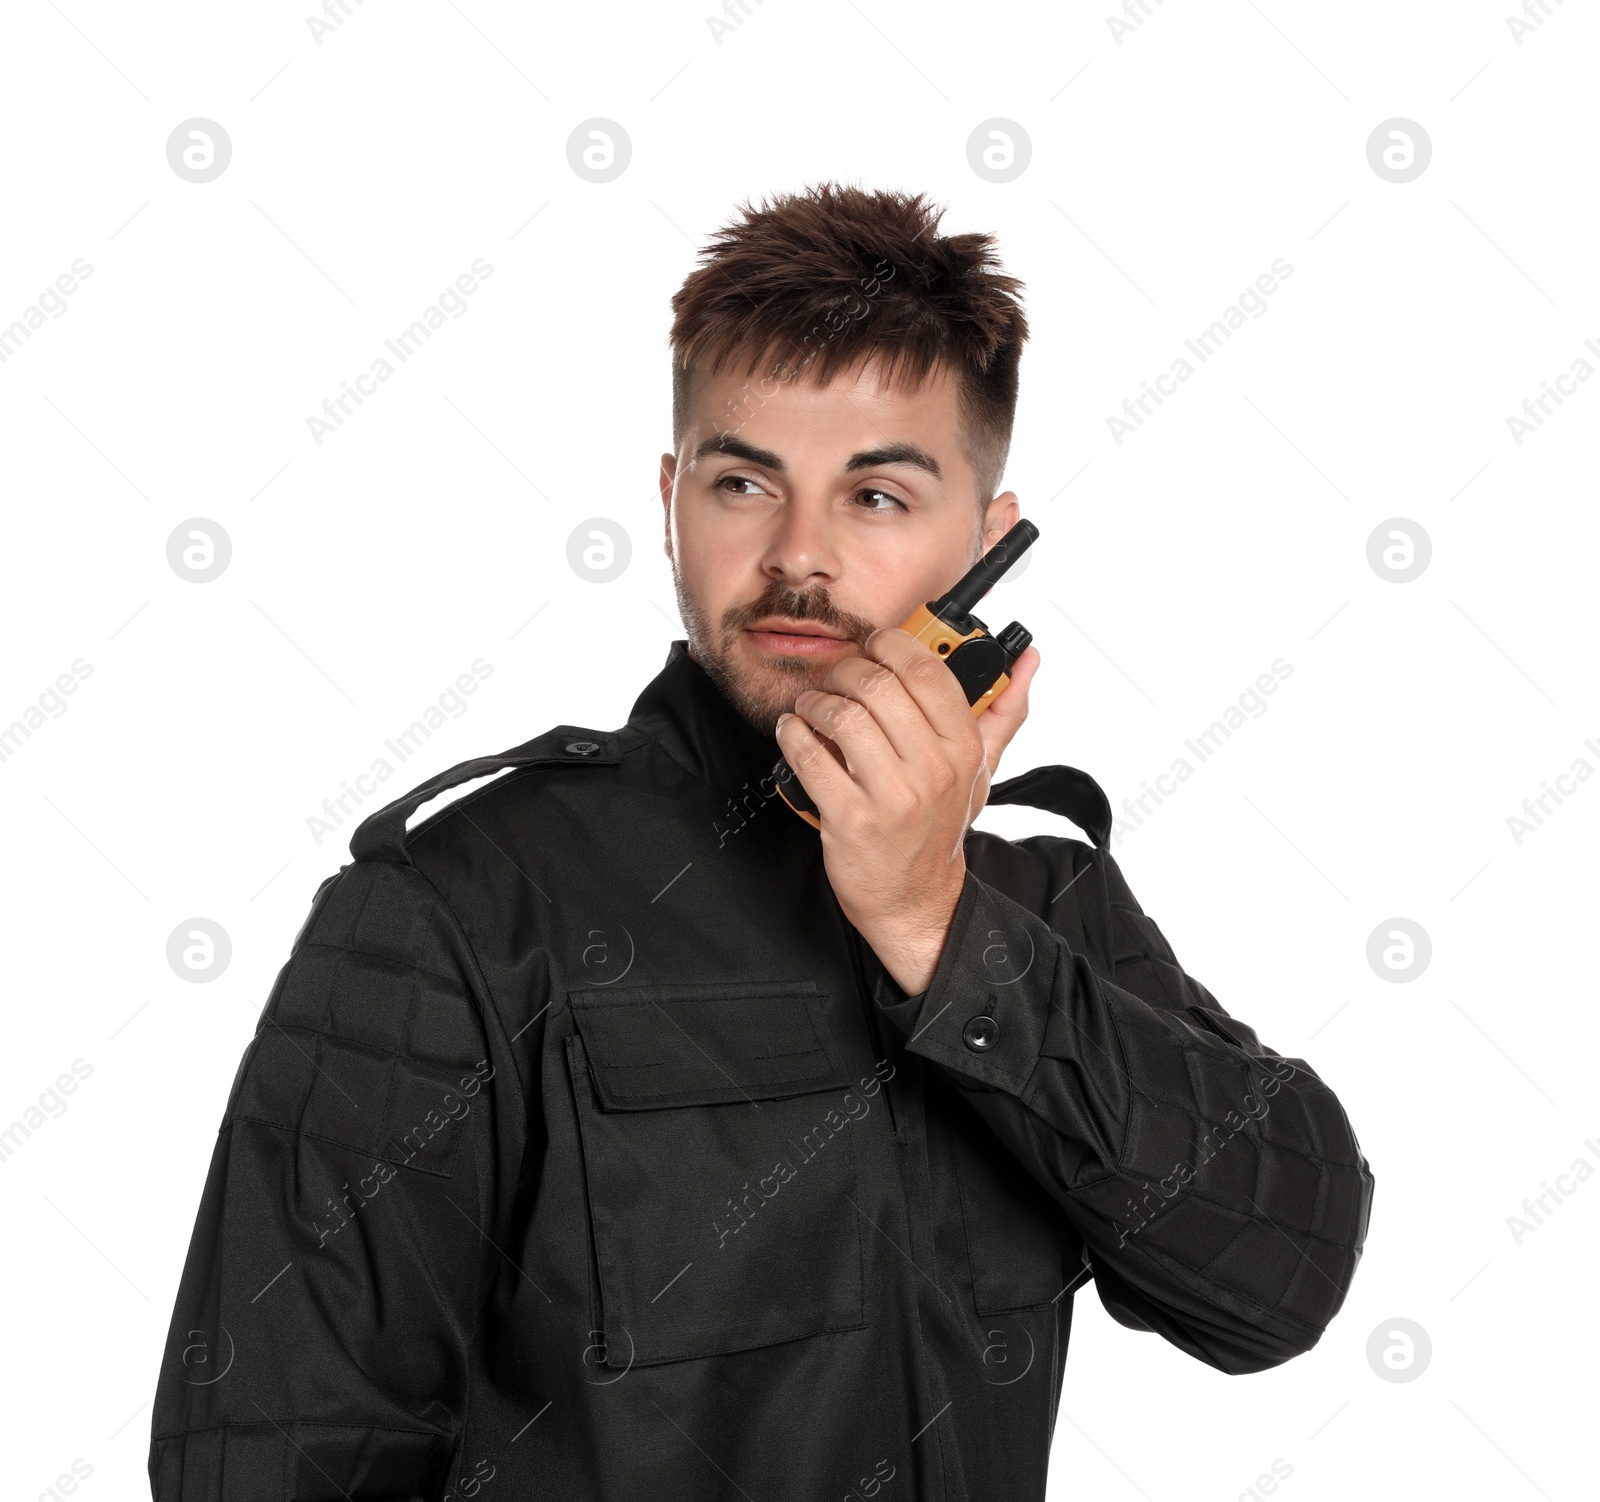 Photo of Male security guard in uniform using portable radio transmitter on white background